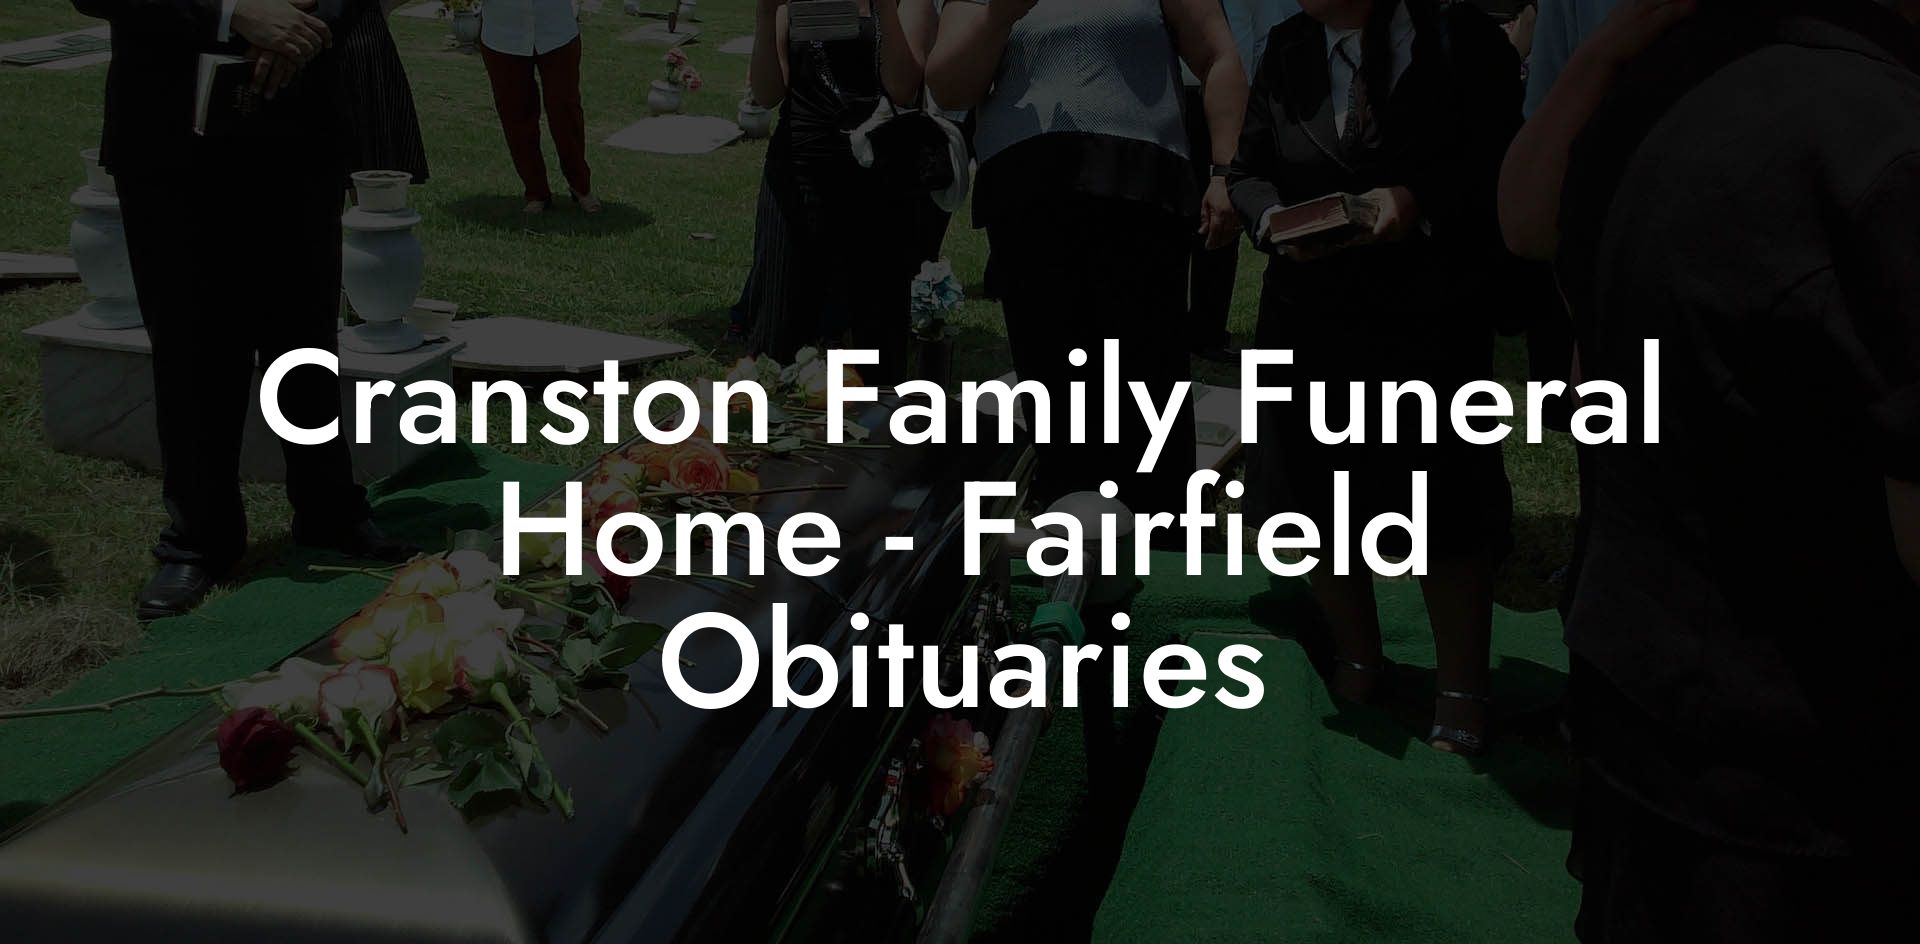 Cranston Family Funeral Home - Fairfield Obituaries